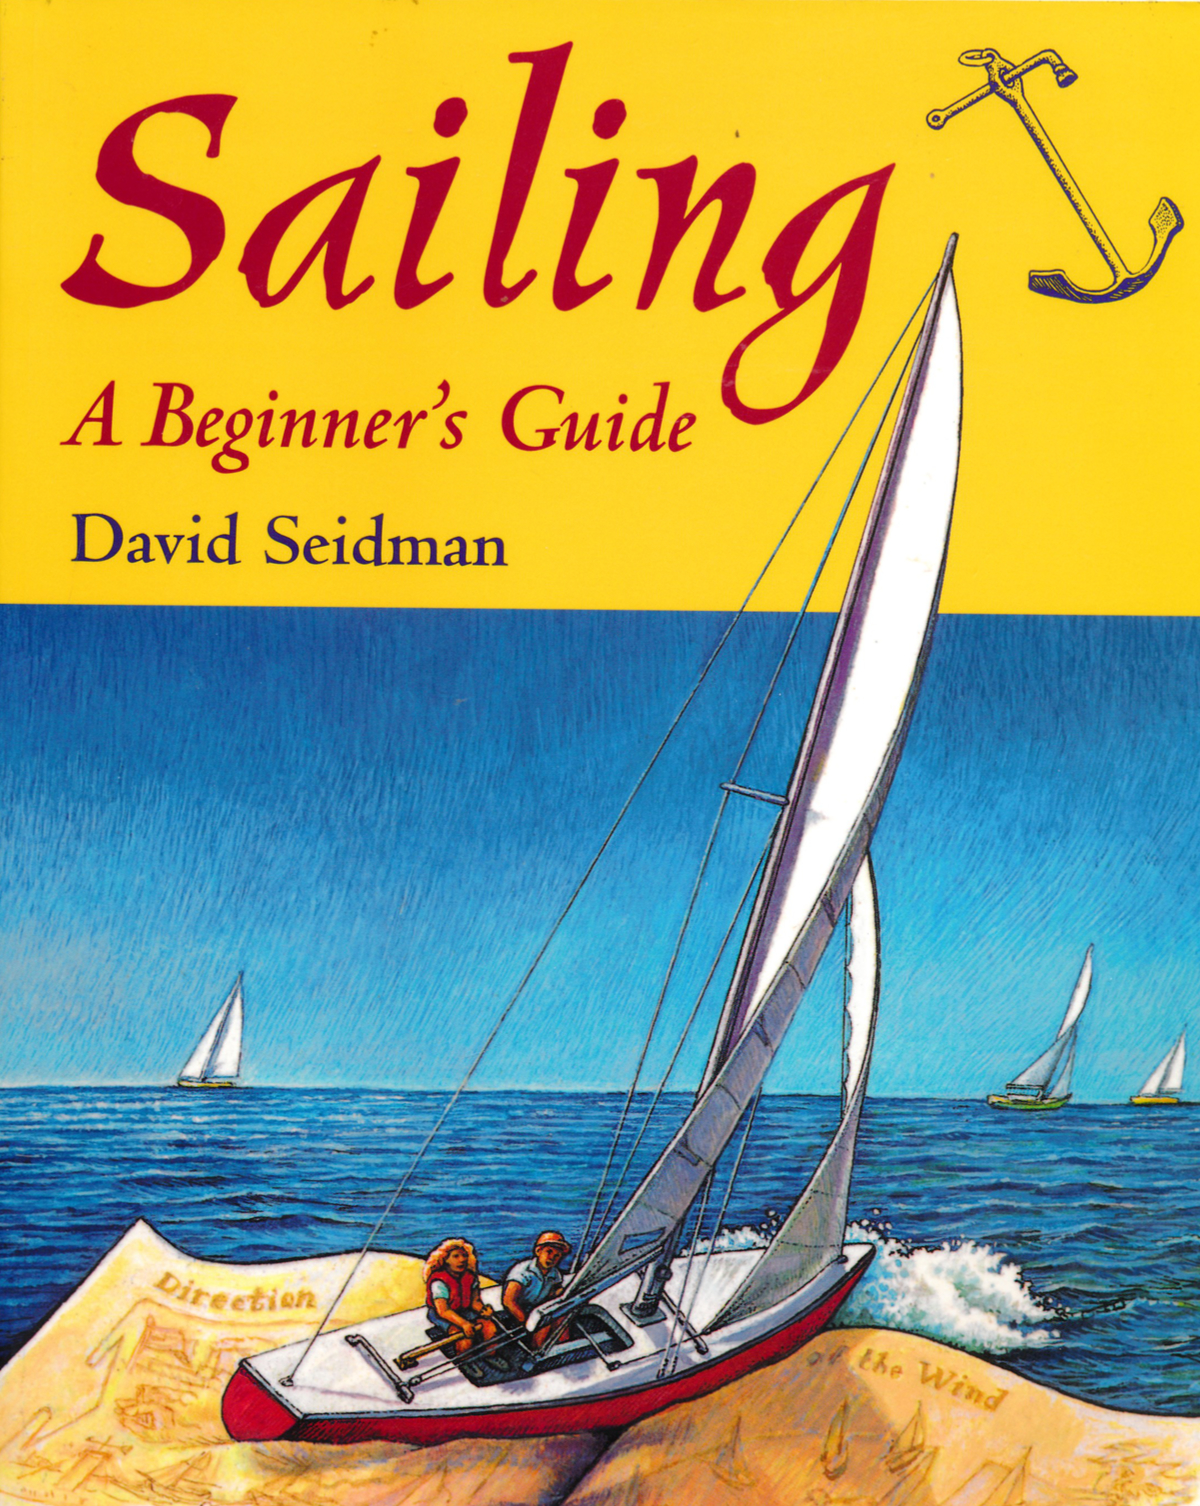 Sailing - A Beginners Guide